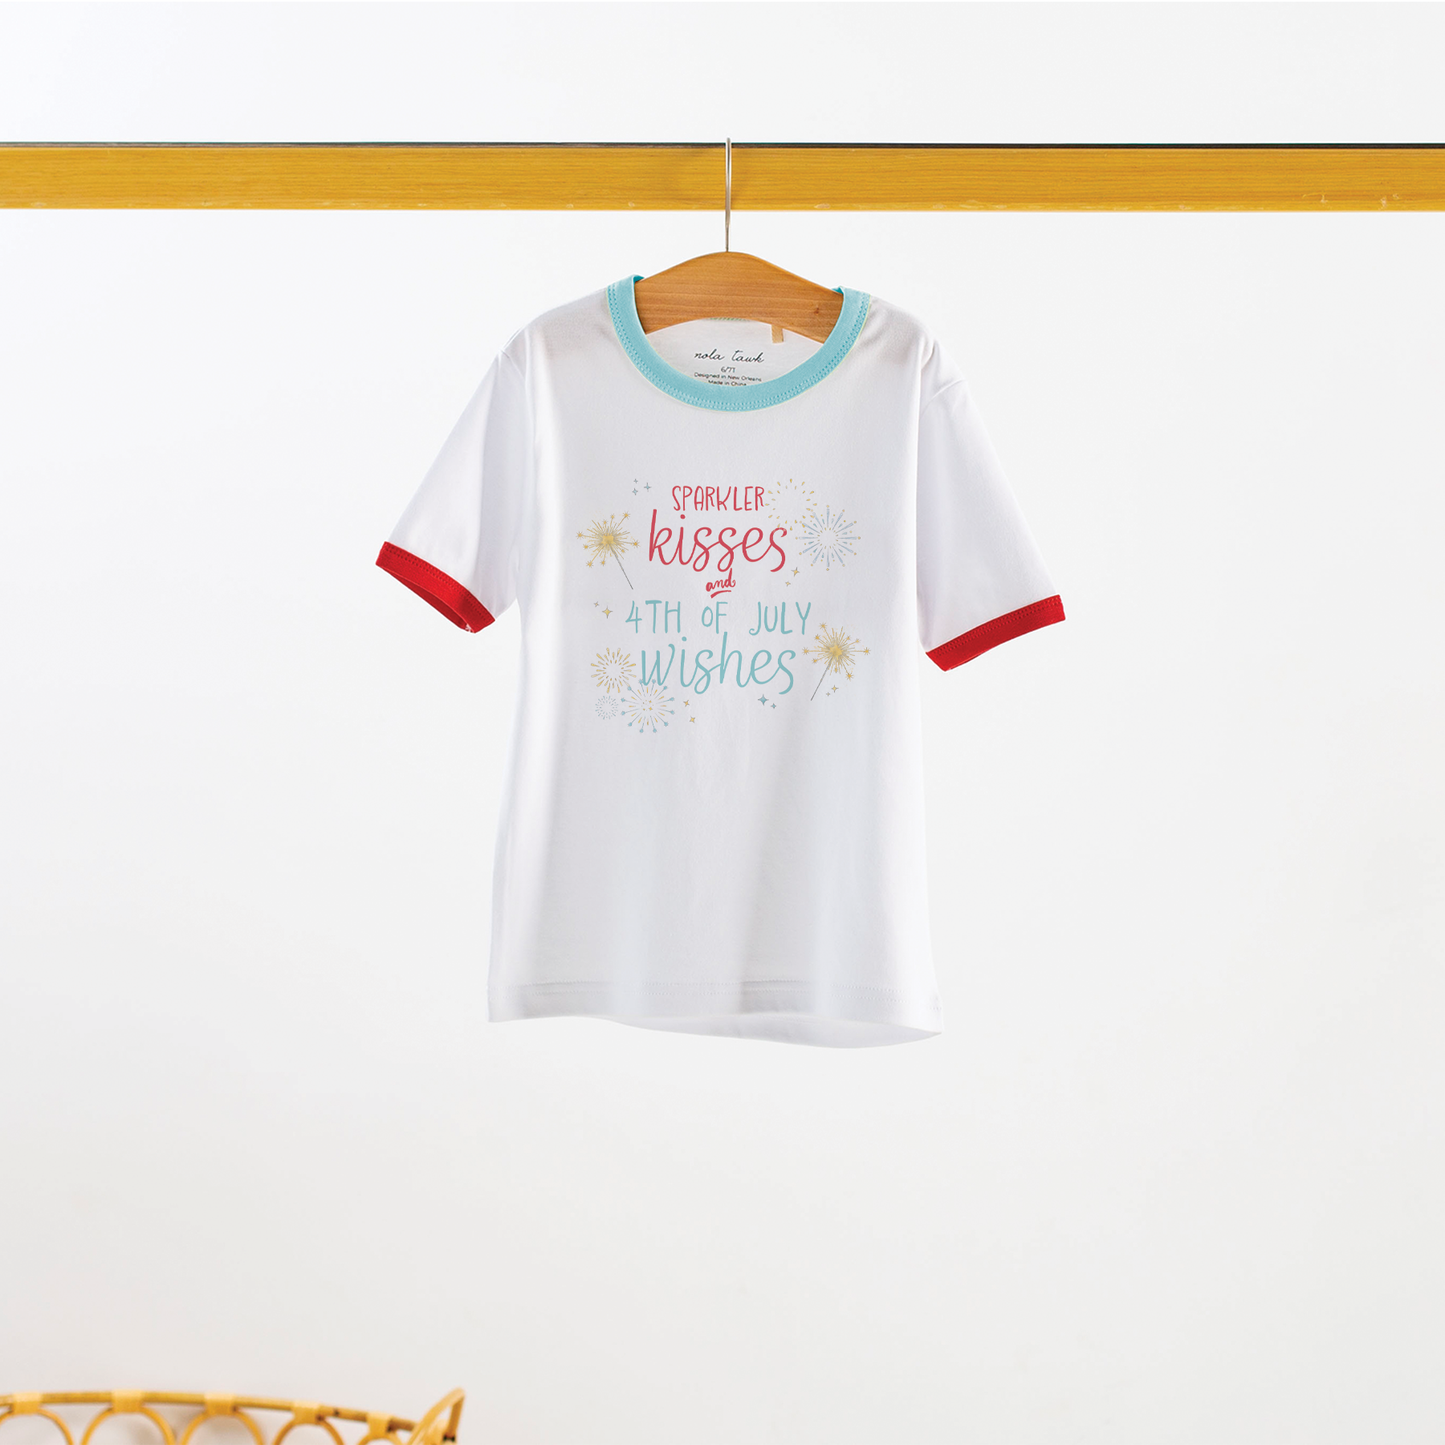 Nola Tawk - Sparkler Kisses & 4th of July Wishes Tee